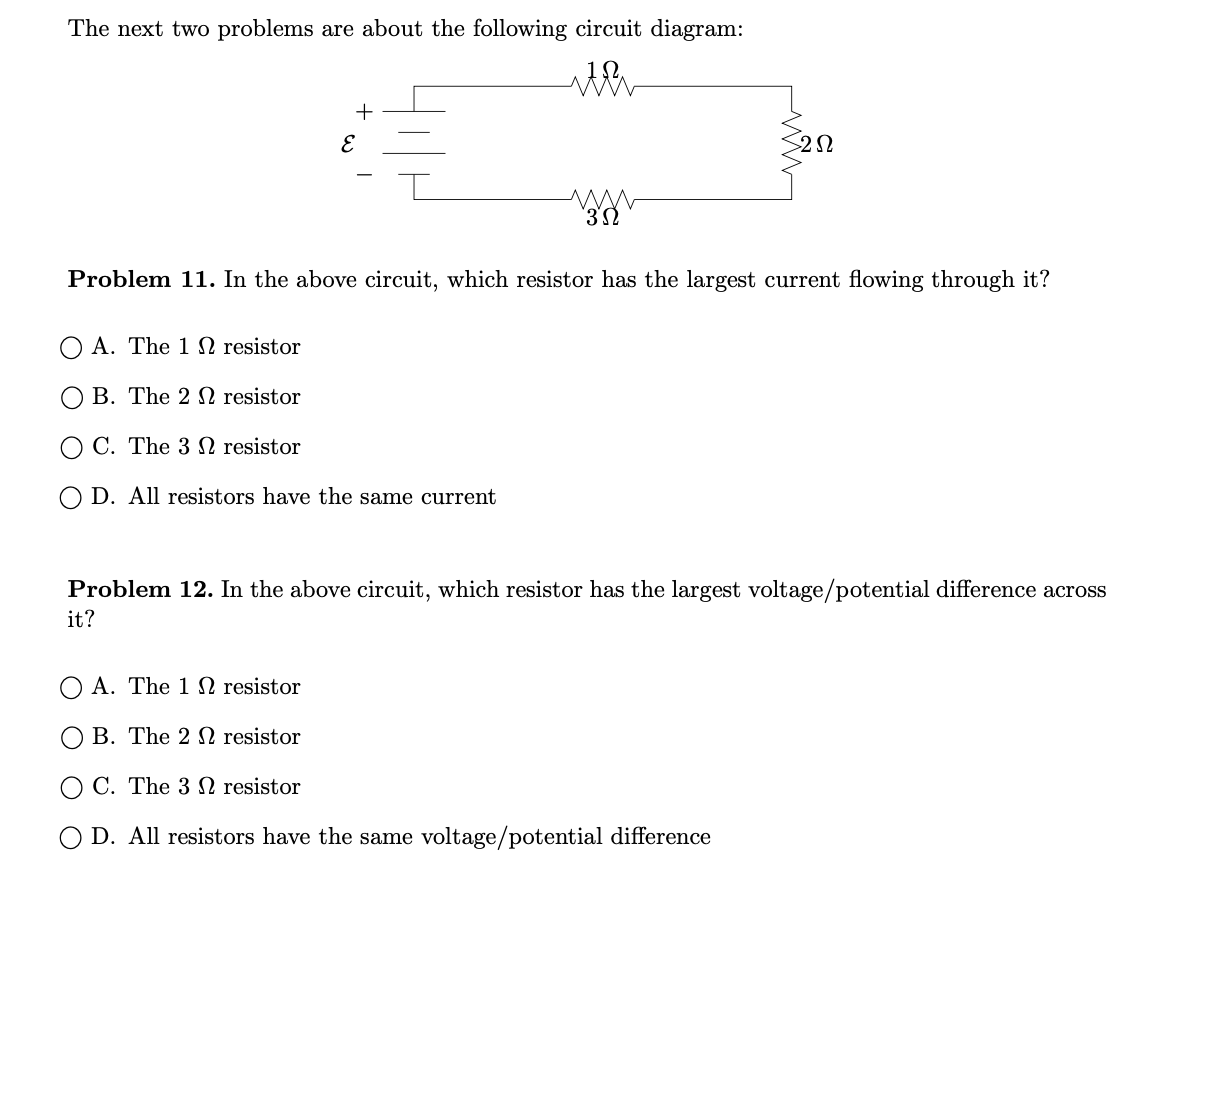 The next two problems are about the following circuit diagram:
Problem 11. In the above circuit, which resistor has the largest current flowing through it?
O A. The 1 N resistor
B. The 2 N resistor
C. The 3 N resistor
O D. All resistors have the same current
Problem 12. In the above circuit, which resistor has the largest voltage/potential difference across
it?
O A. The 1 N resistor
B. The 2 N resistor
O C. The 3 N resistor
O D. All resistors have the same voltage/potential difference
